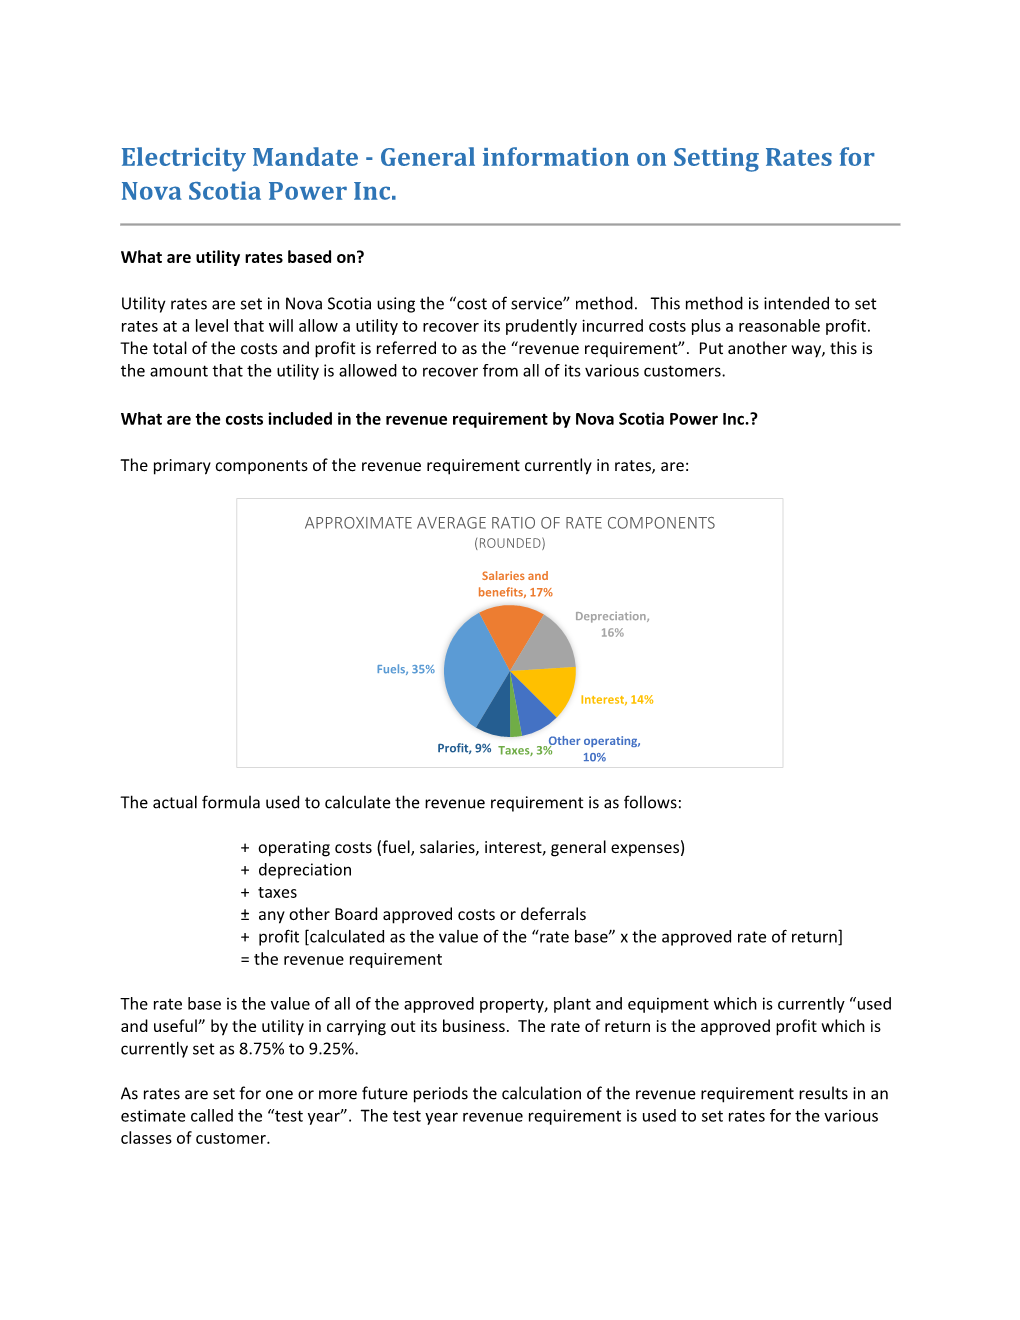 General Information on Setting Rates for Nova Scotia Power Inc